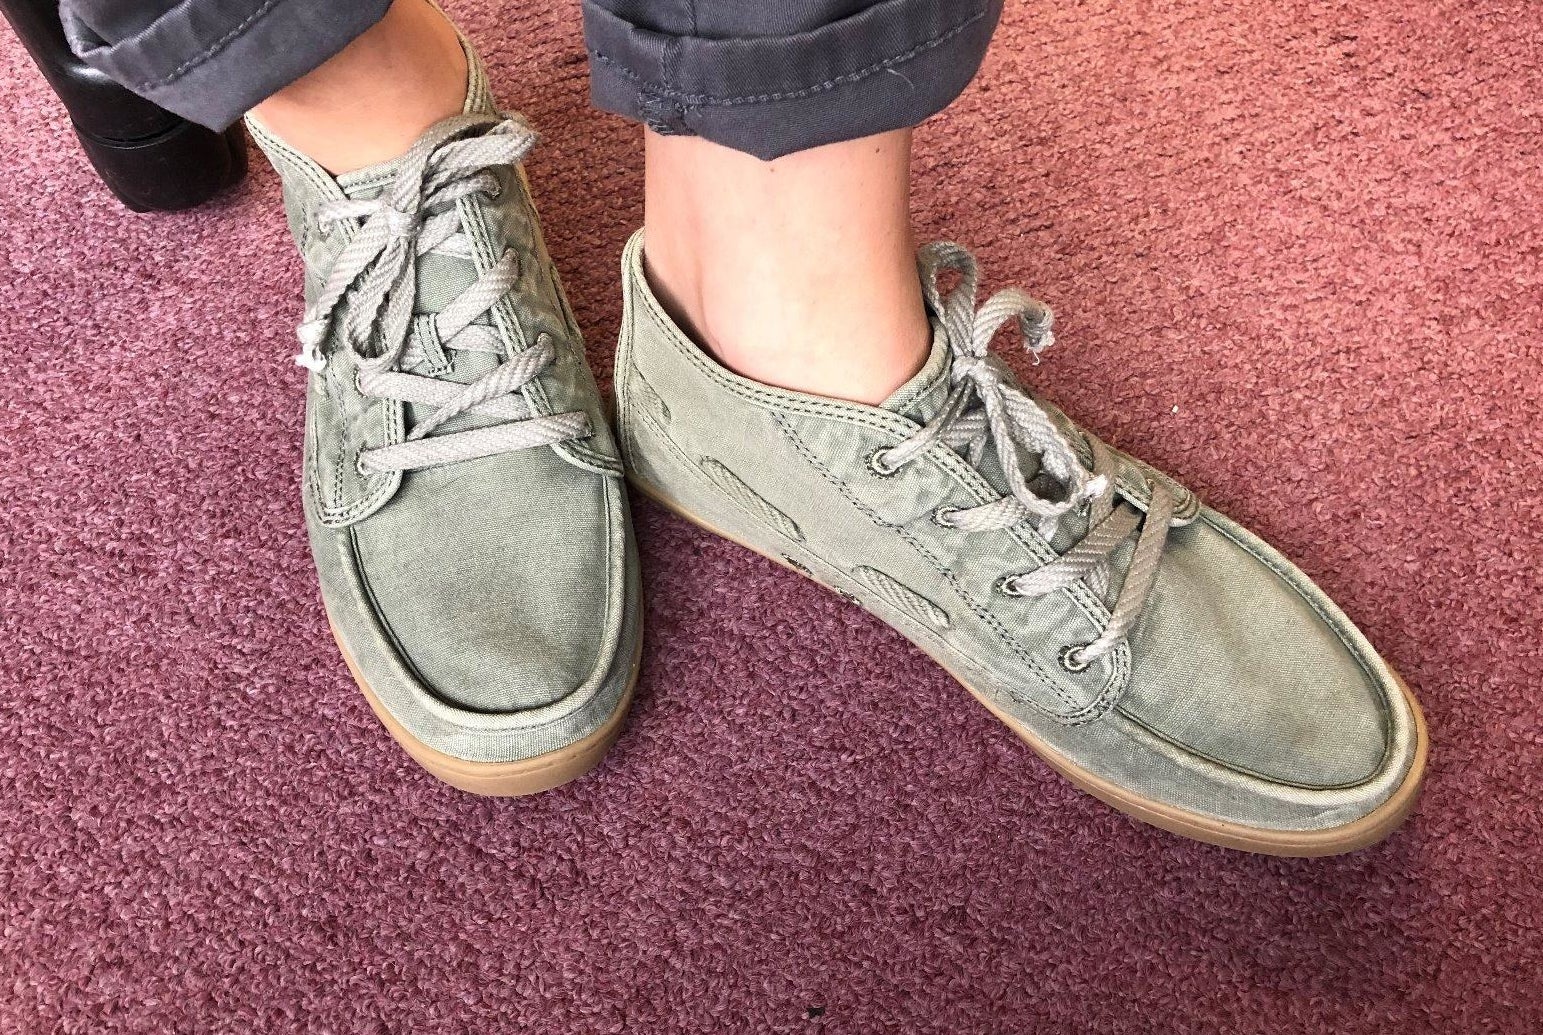 28 Pairs Of Shoes That Are Perfectly Suited For Fall Weather